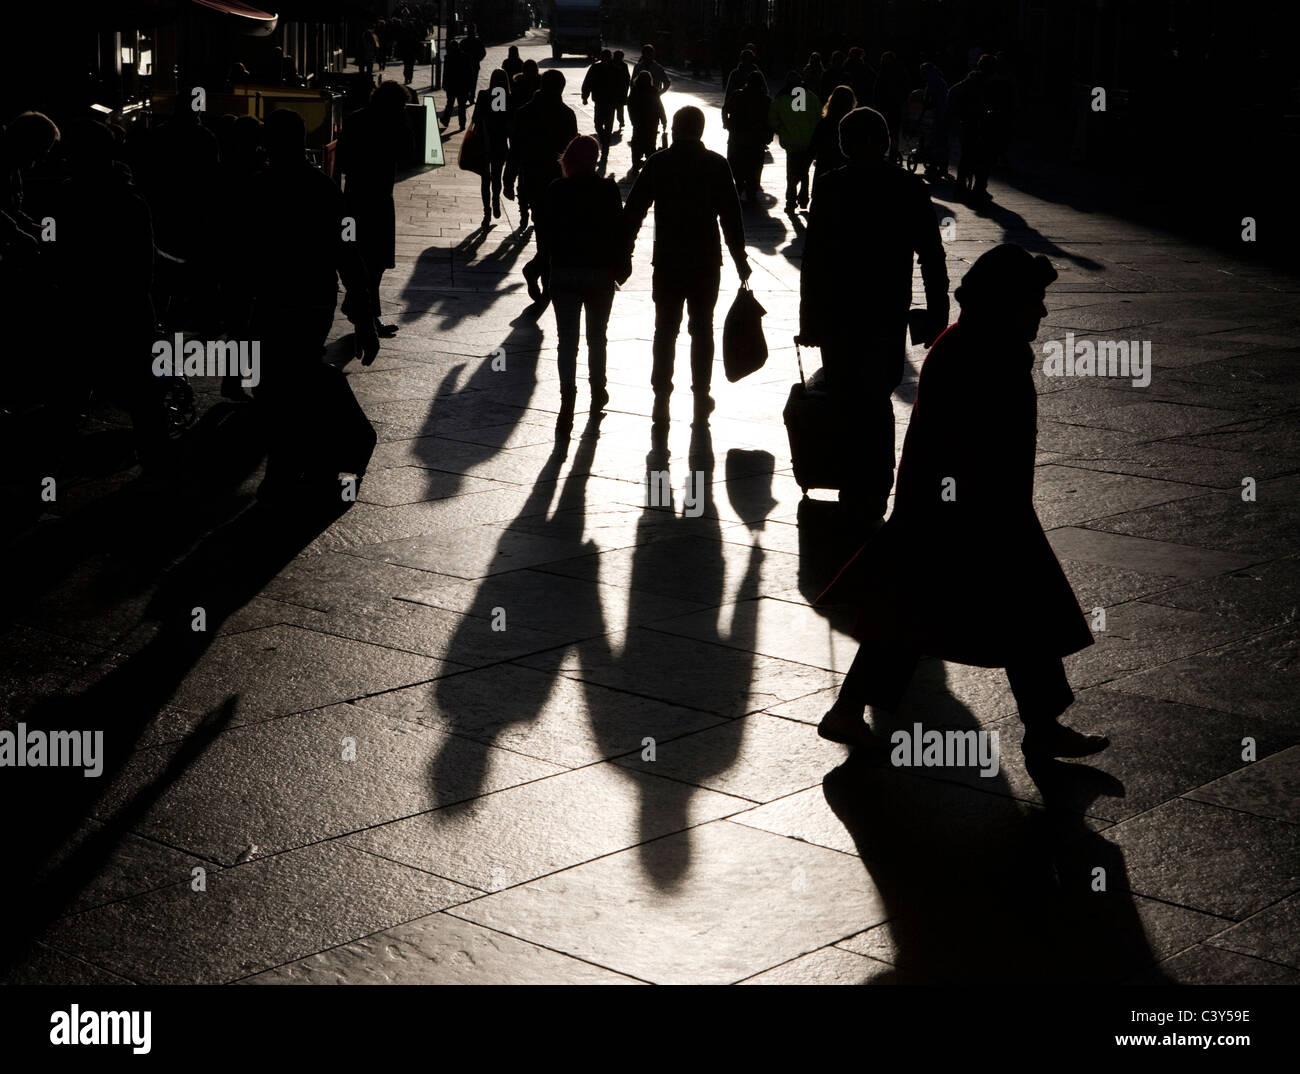 People shopping on a paved city street casting long shadows Stock Photo